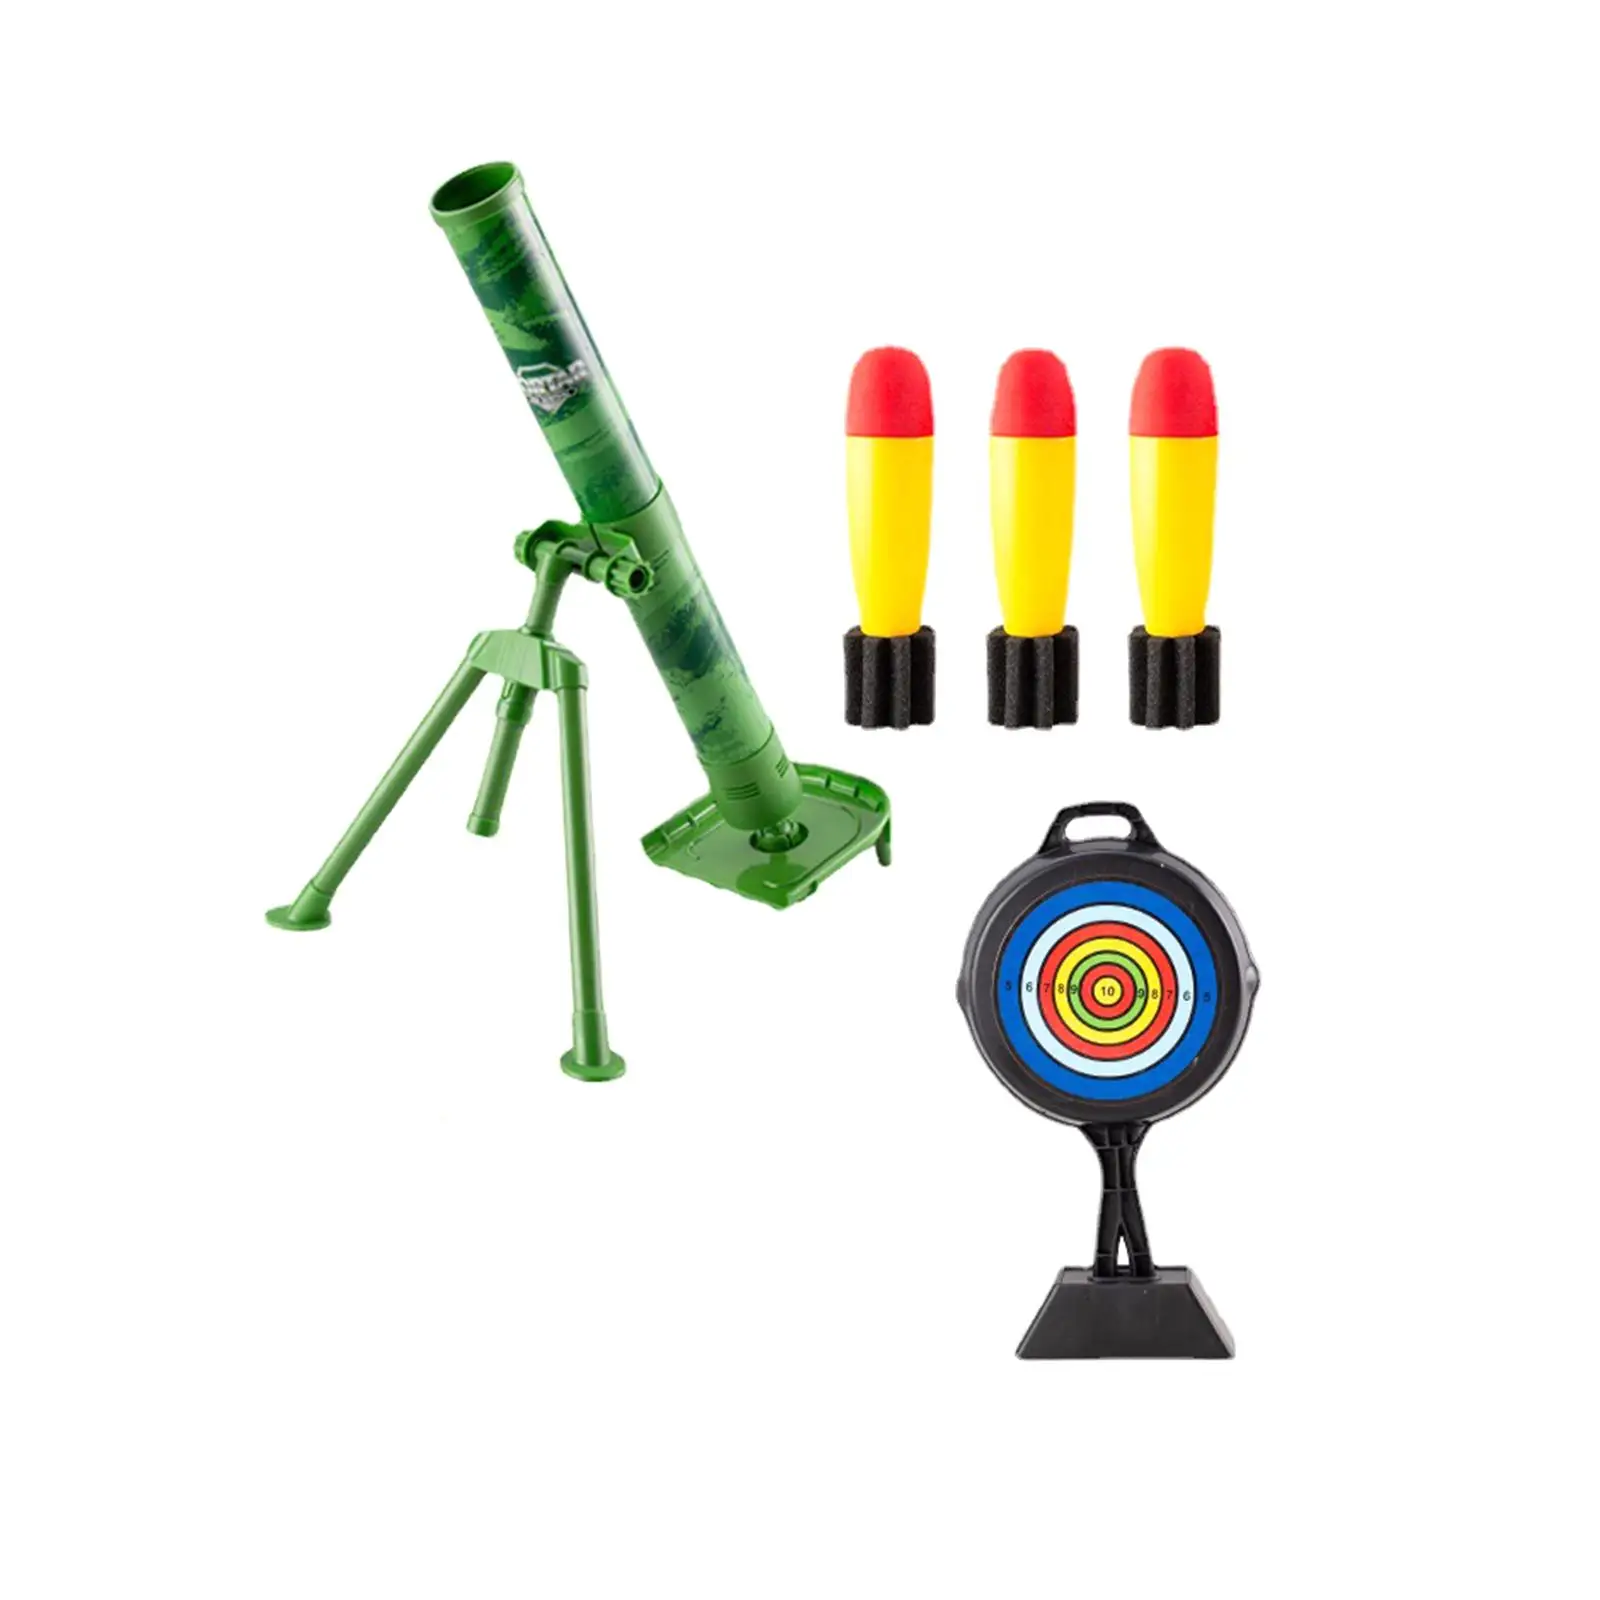 Mortar Launcher Toy Set Professional with 3 Safety Foam Shells Rocket Launcher for Kids Boys and Girls Festival Gifts